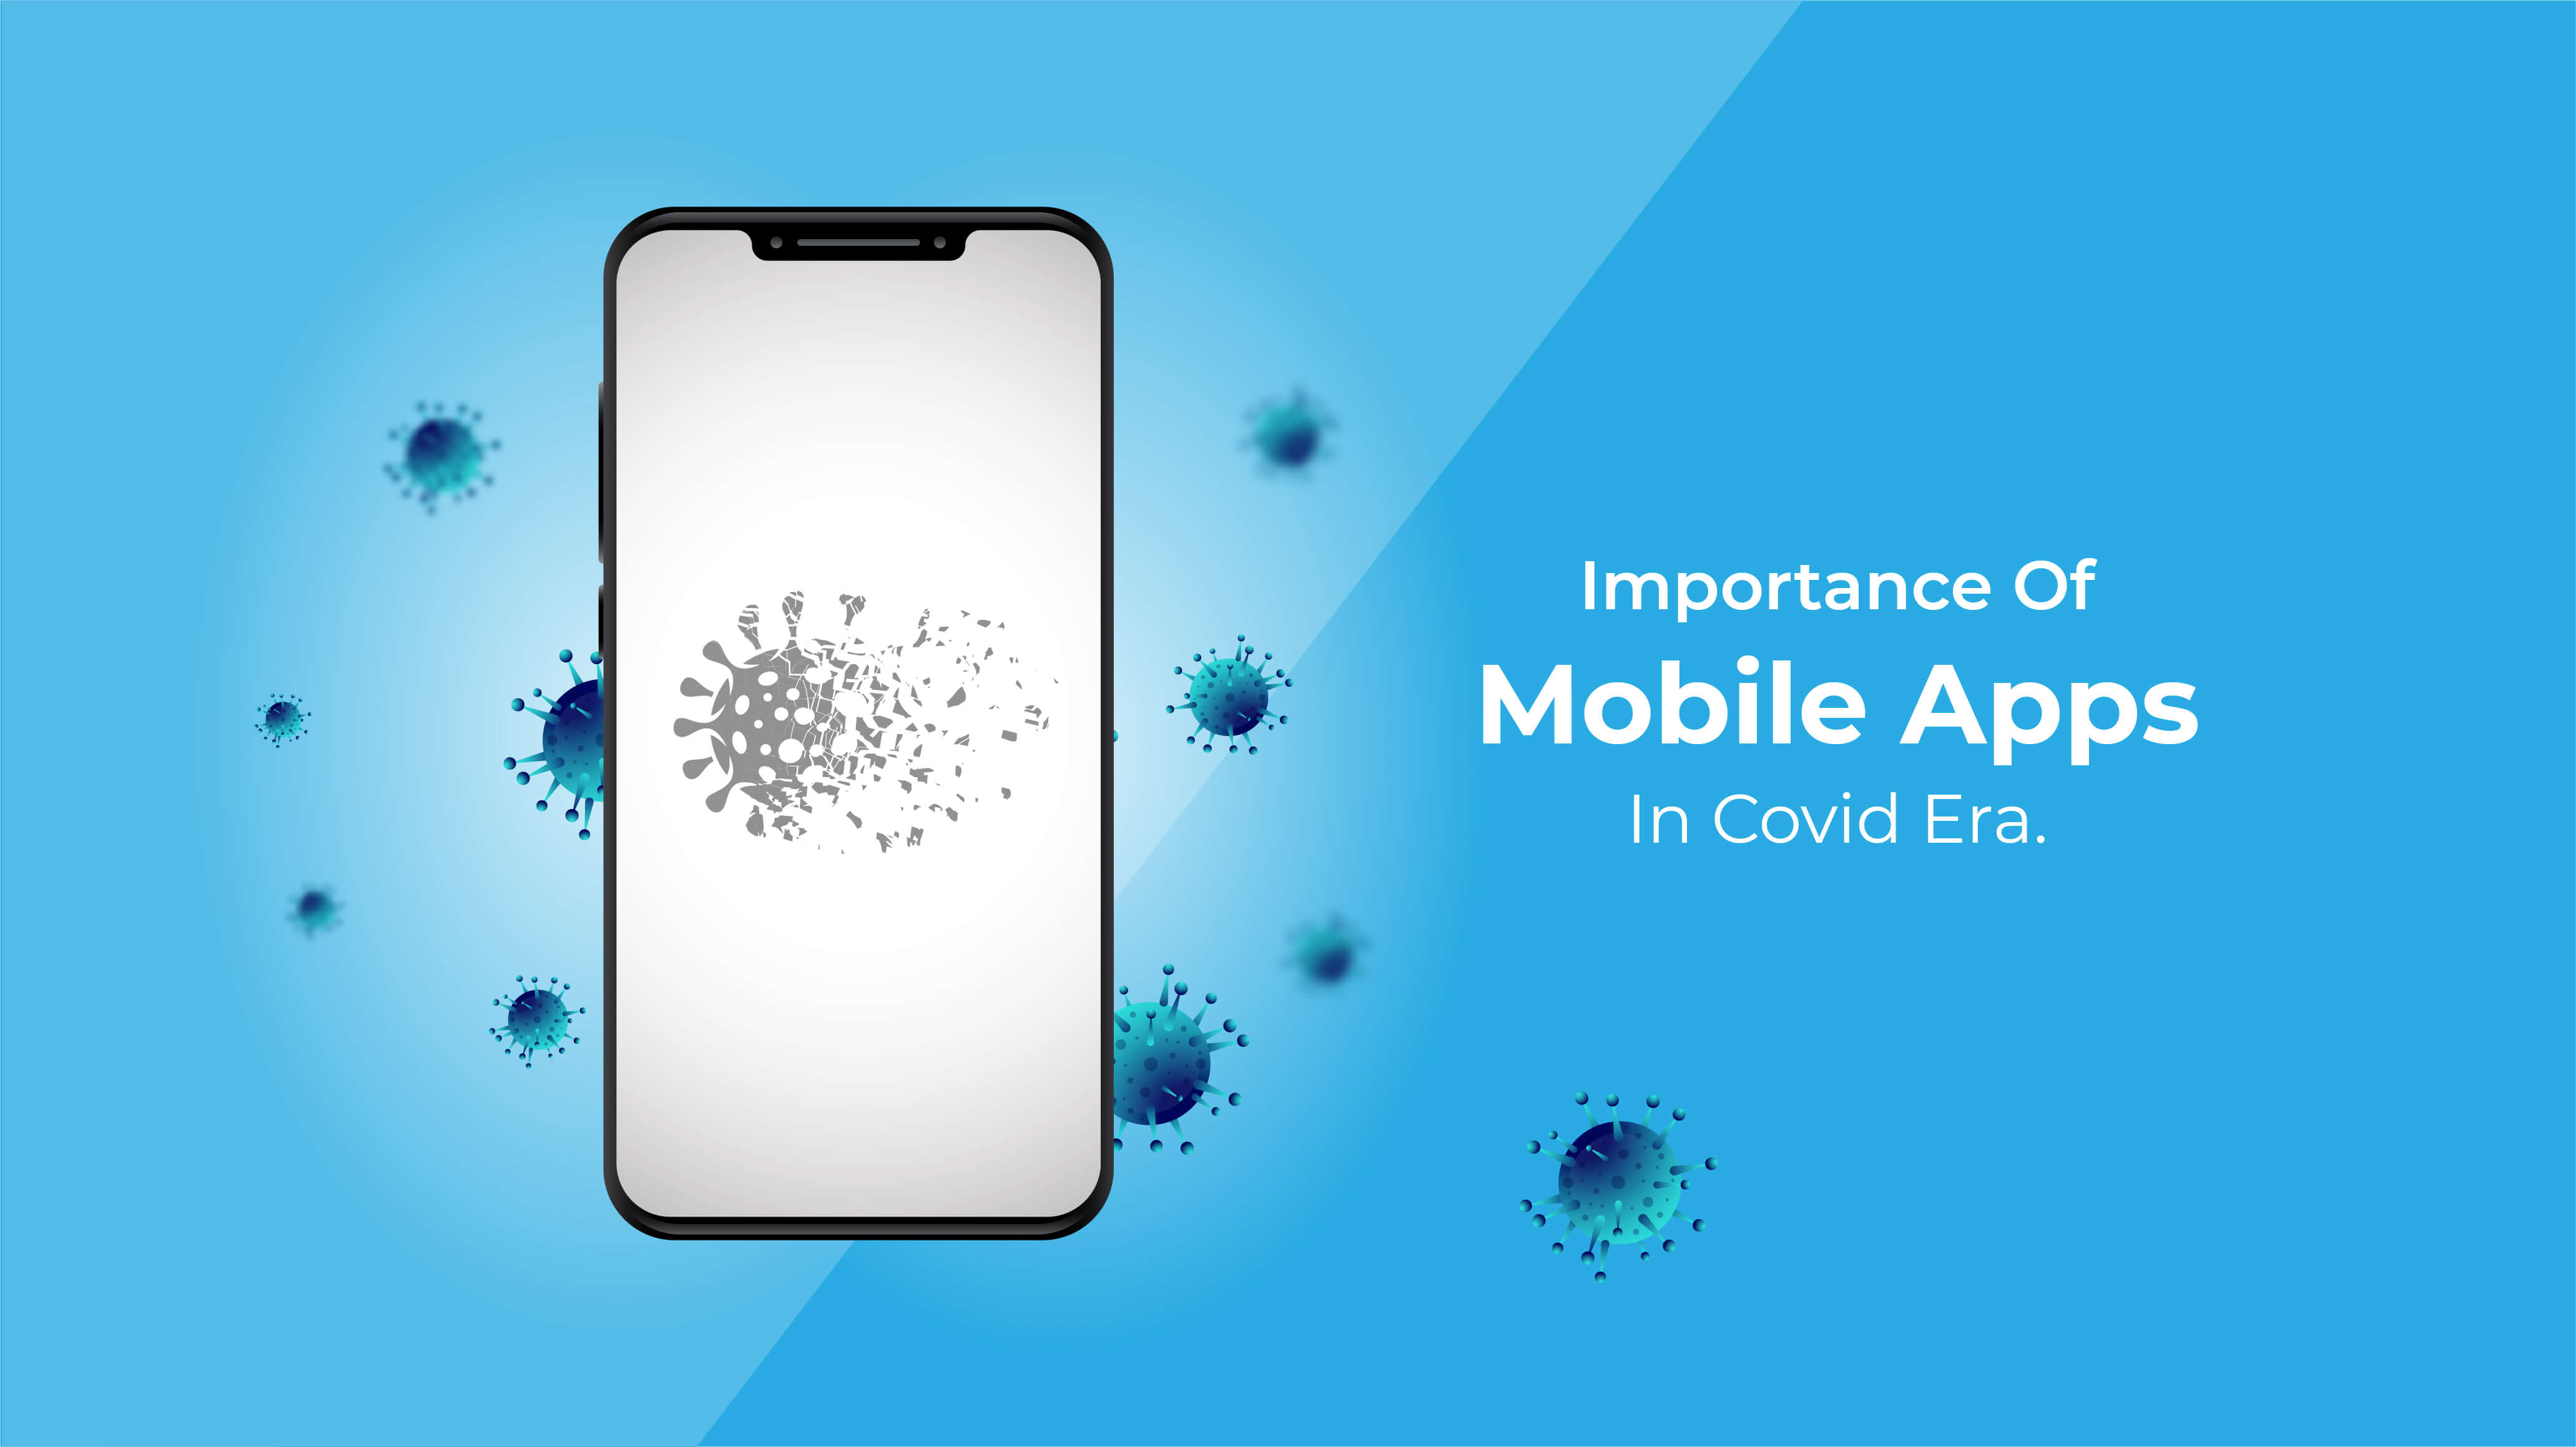 Importance Of Mobile Apps In Covid Era